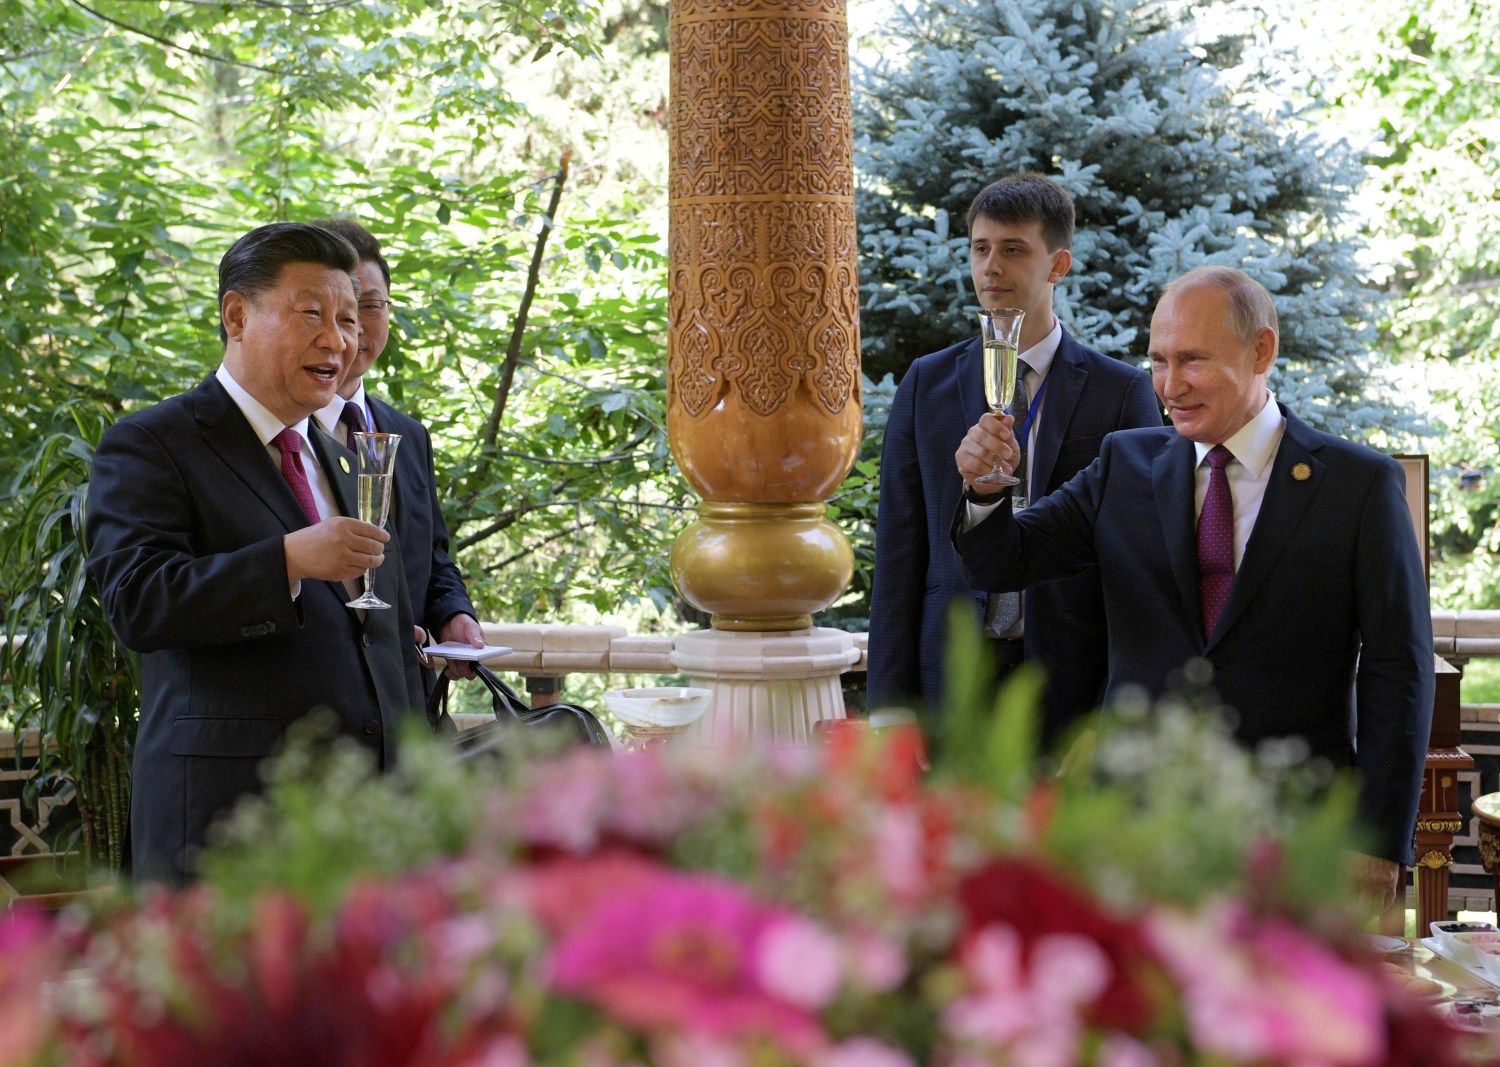 Russian President Vladimir Putin (R) toasts with Chinese President Xi Jinping while congratulating him on his birthday before the Conference on Interaction and Confidence-Building Measures in Asia (CICA) in Dushanbe, Tajikistan June 15, 2019. Sputnik/Alexei Druzhinin/Kremlin via REUTERS.